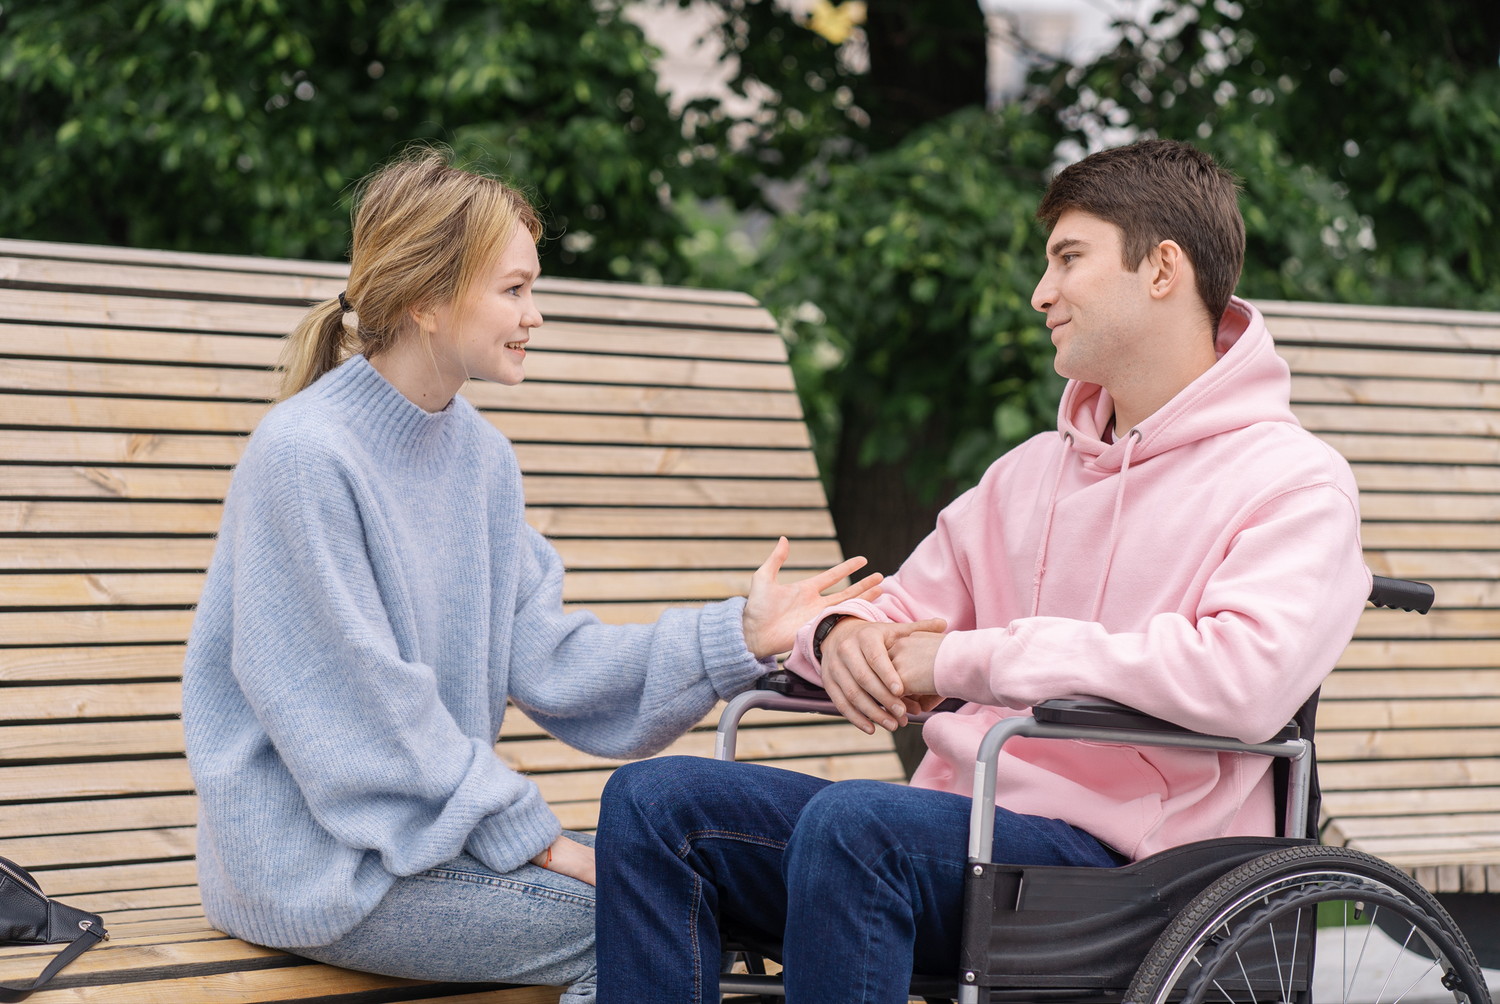 A girl sitting on a bench talking to a guy sitting in a wheelchair